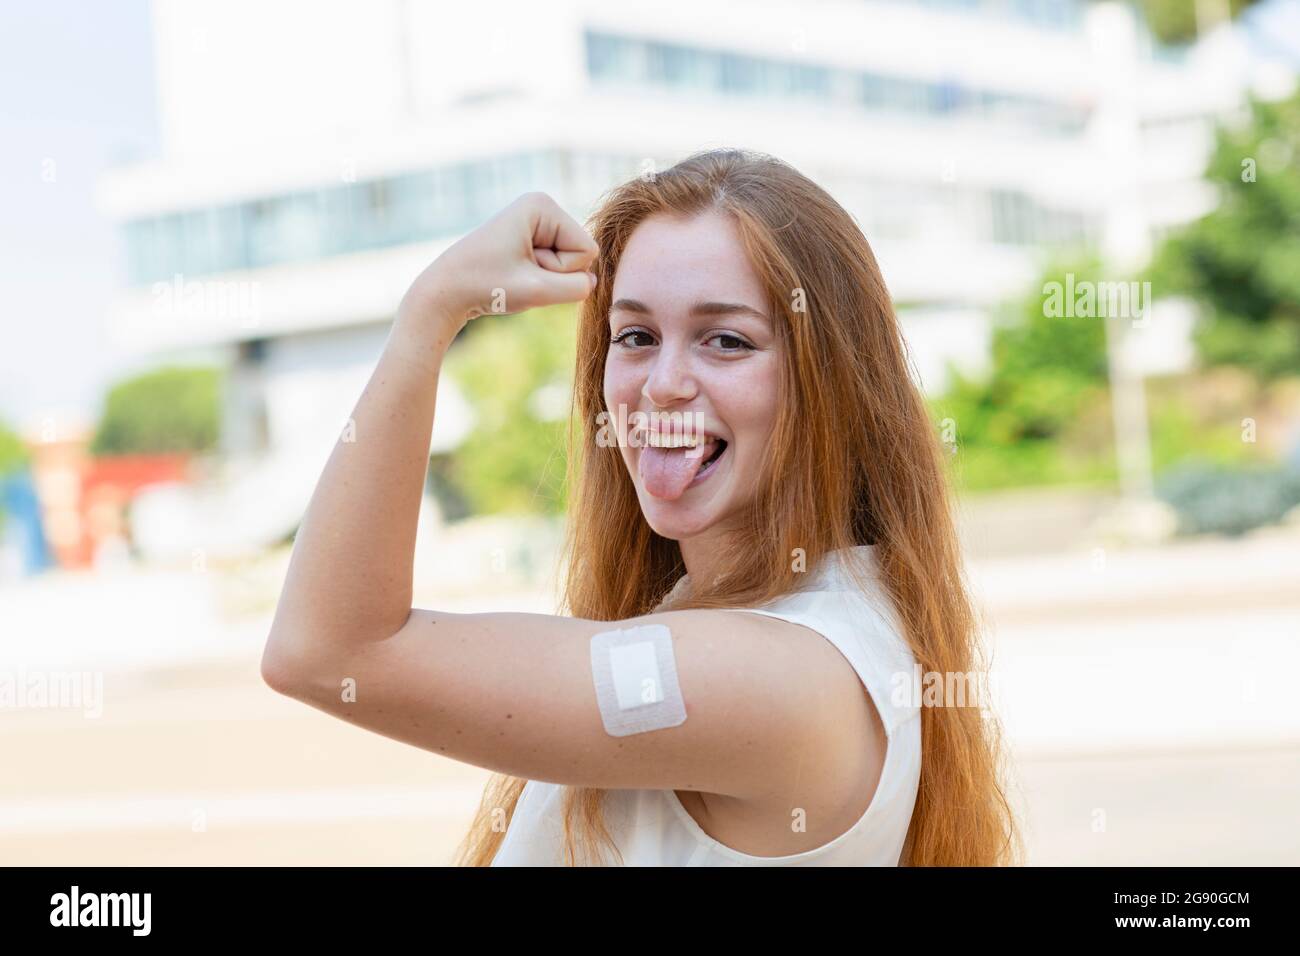 Businesswoman with bandage on arm sticking out tongue during pandemic Stock Photo